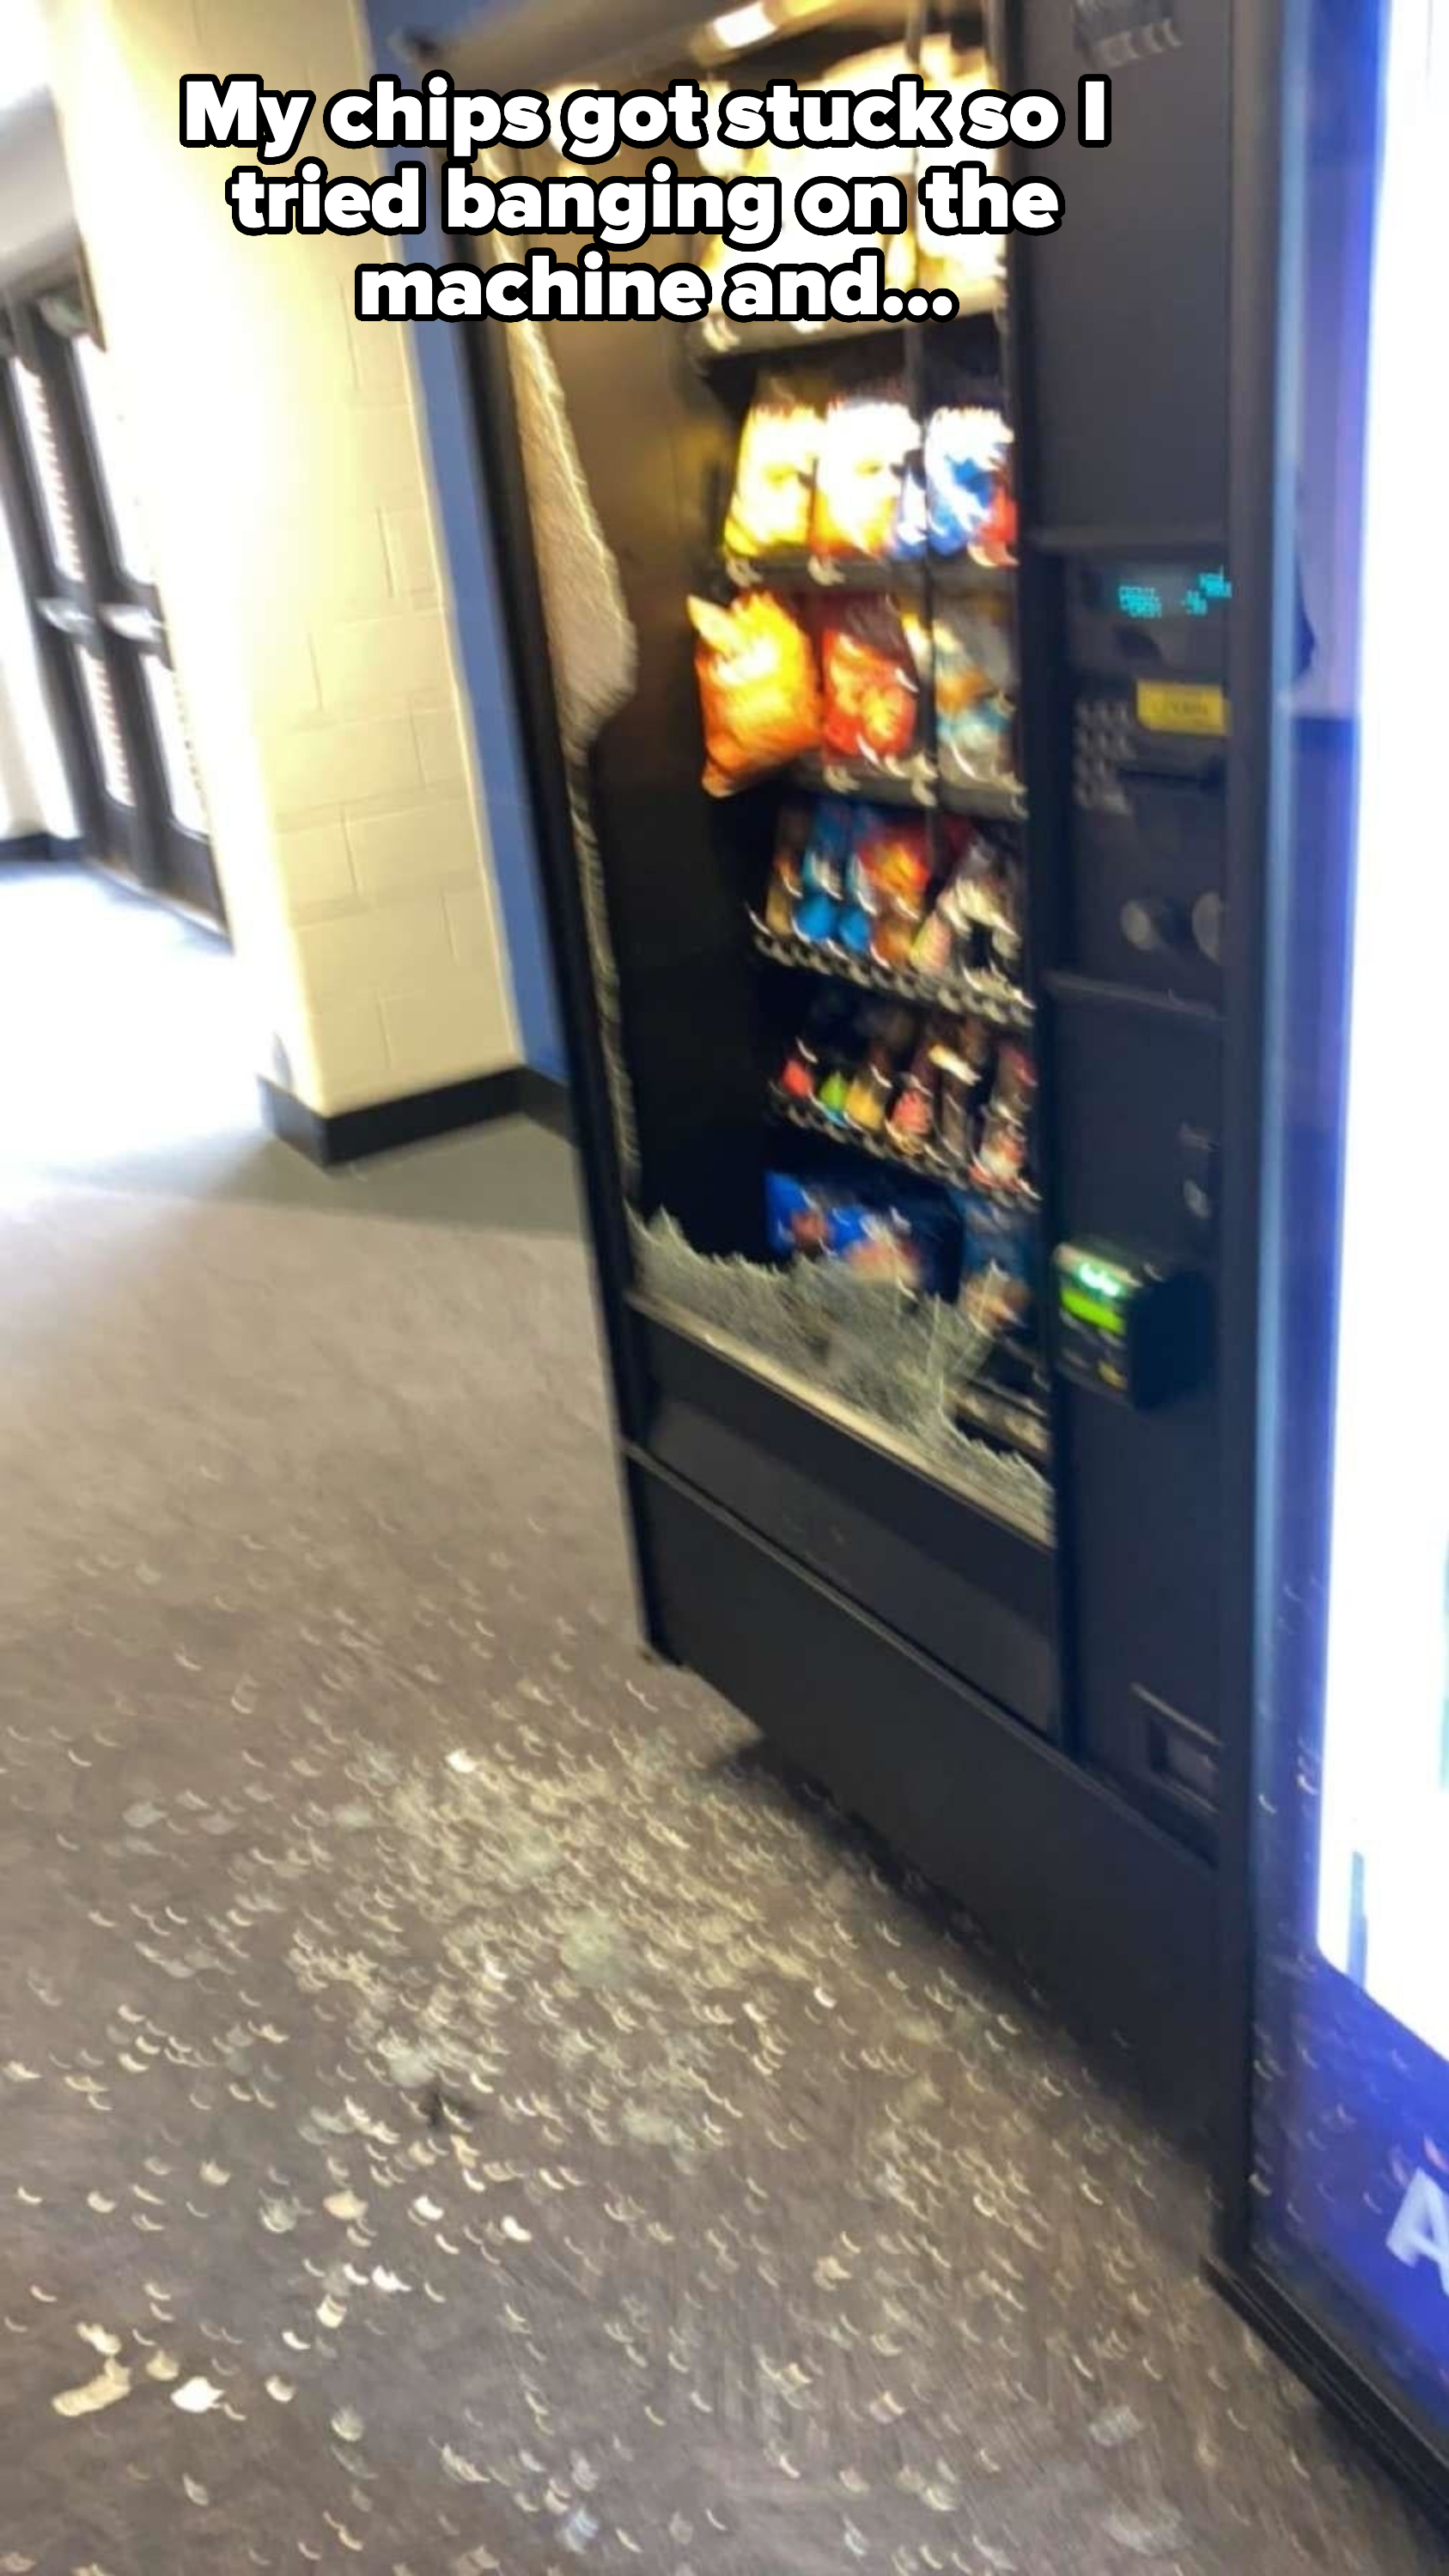 A person who kept banging on the vending machine to get their stuck chips until the glass broke